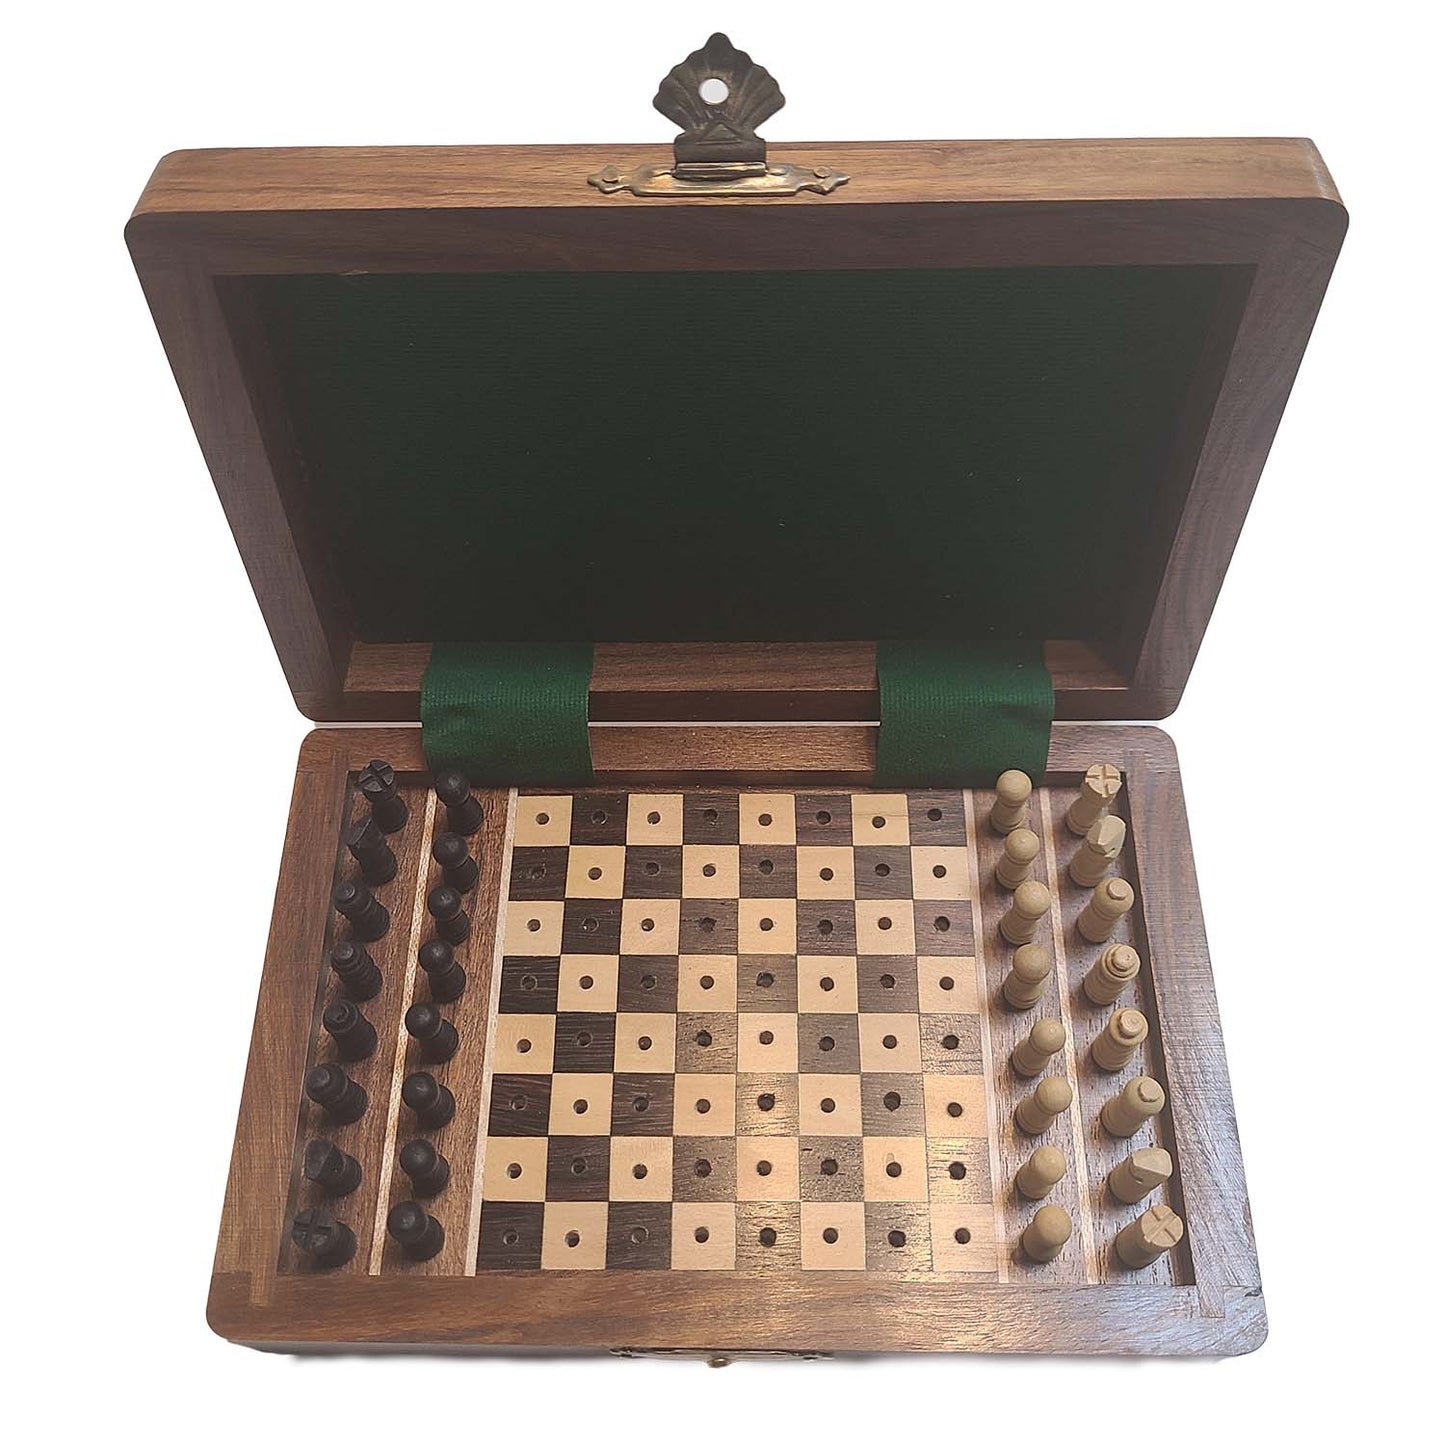 Wooden Travel Chess Set with Pegged Chessmen – 6 inches